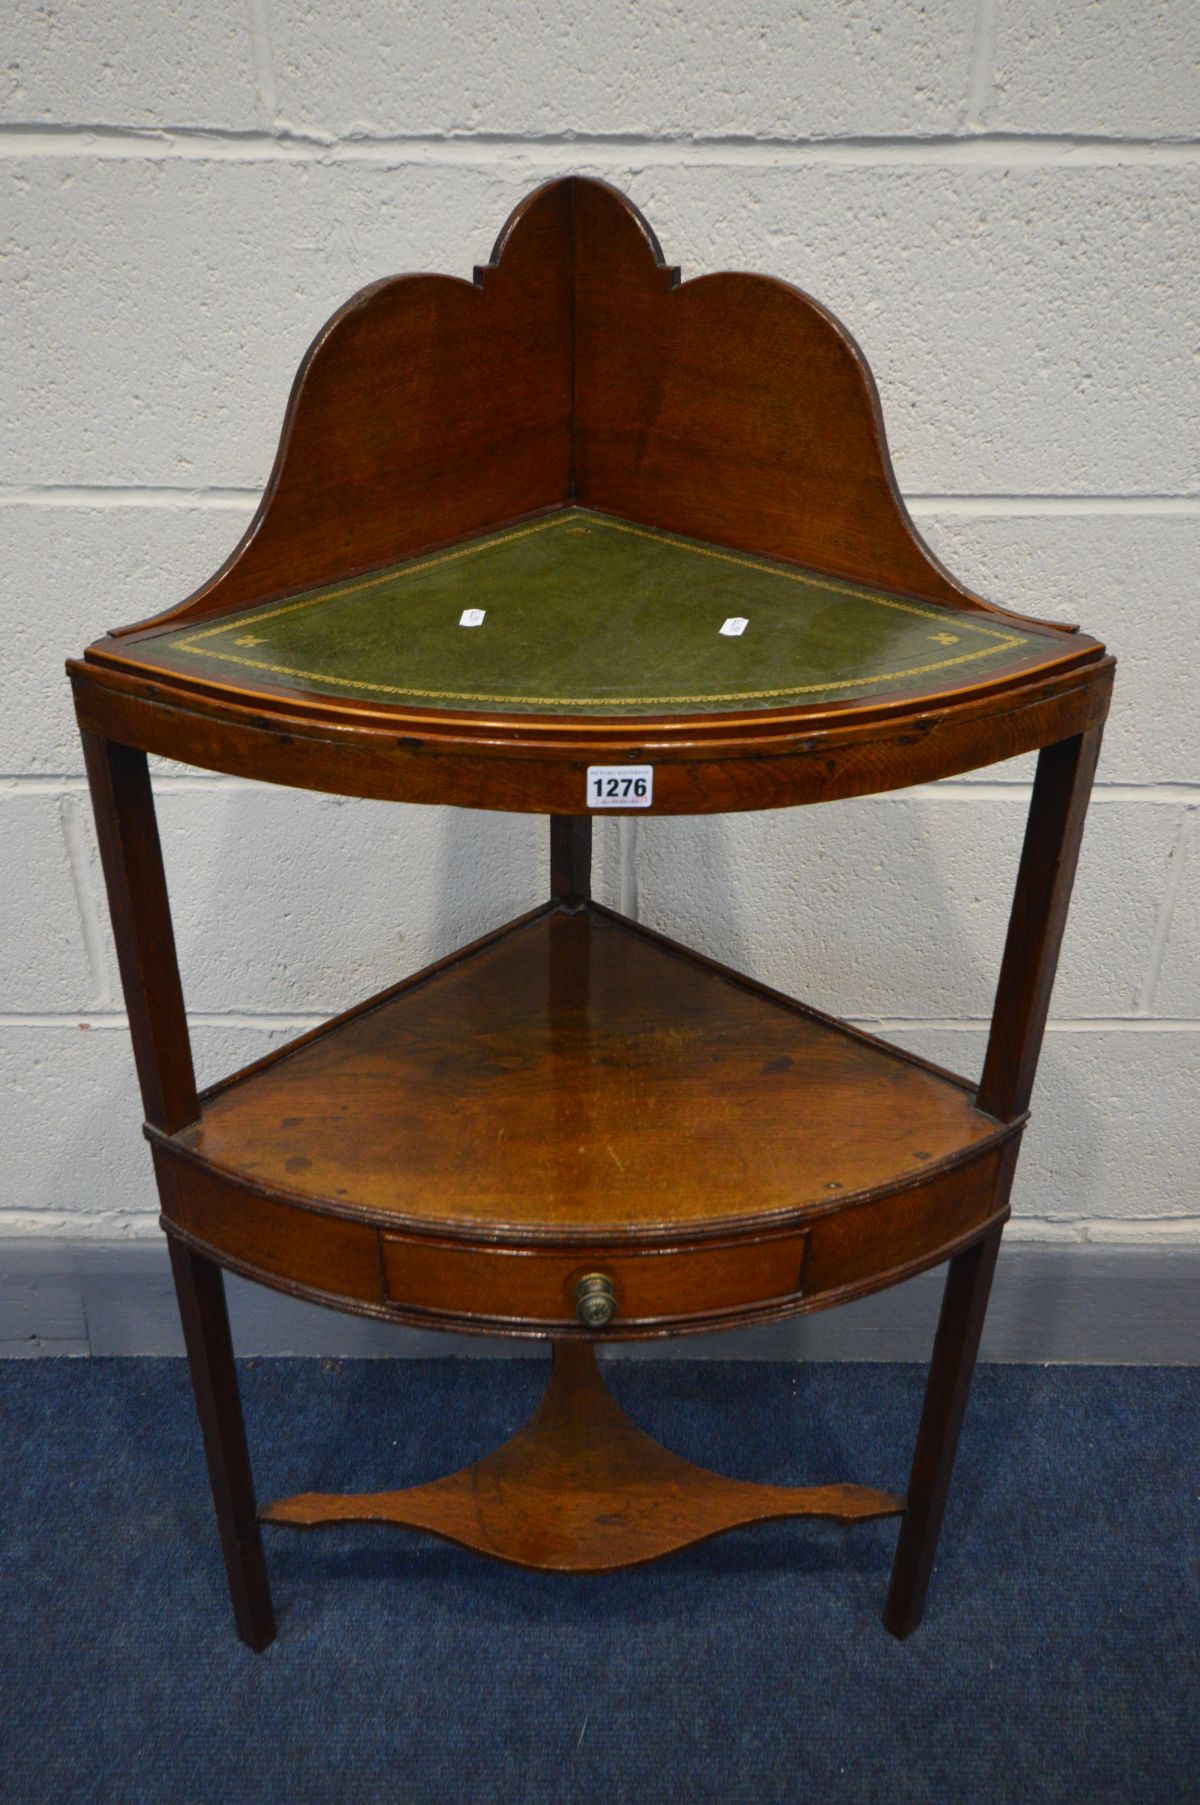 A GEORGIAN OAK CORNER WASHSTAND, with a single drawer and removable green leather tray, width 57cm x